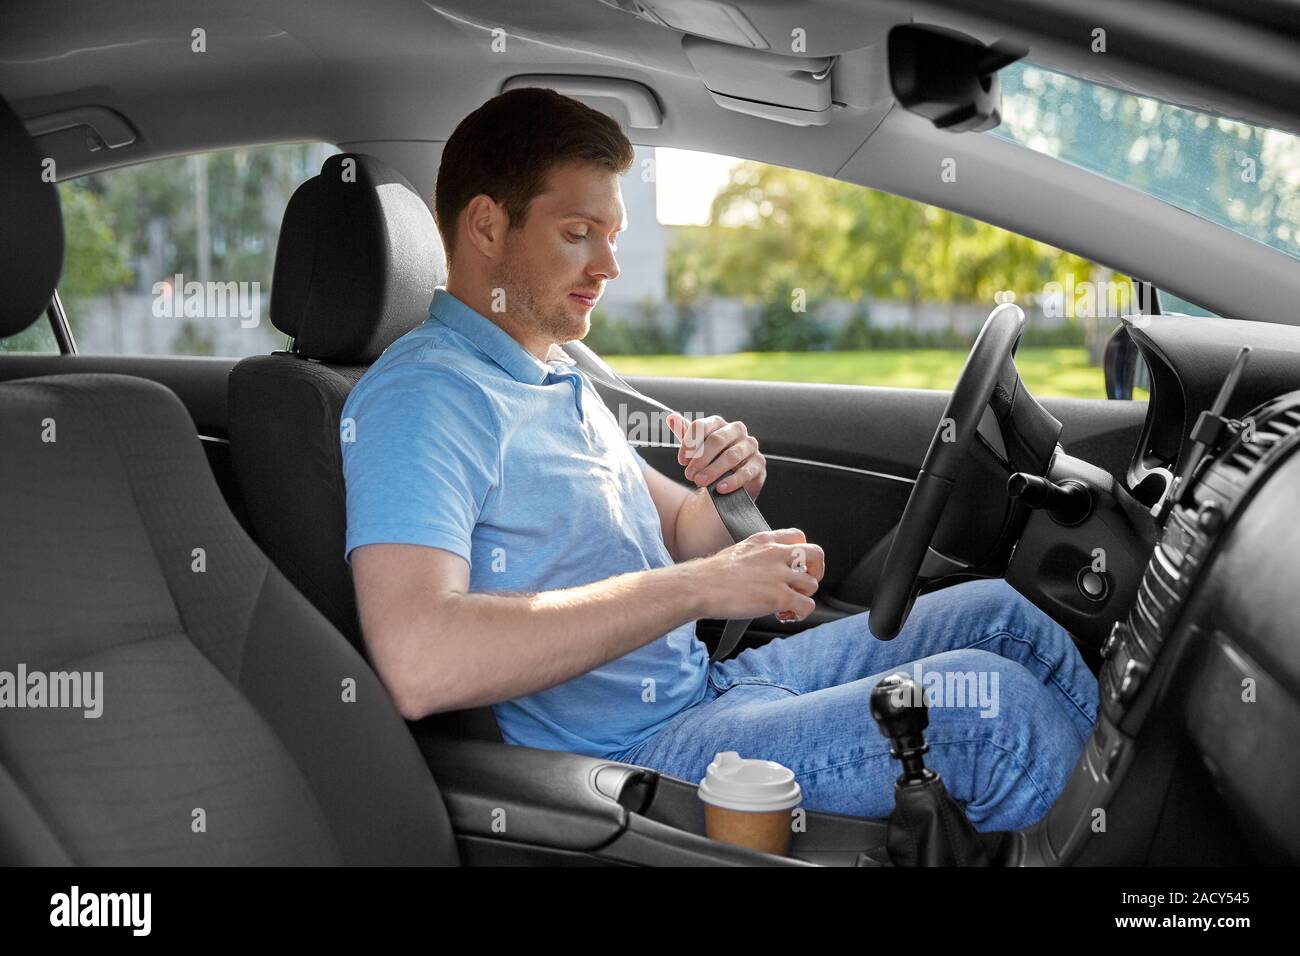 https://c8.alamy.com/comp/2ACY545/transport-vehicle-and-safe-driving-concept-man-or-car-driver-fastening-safety-seat-belt-in-summer-2ACY545.jpg